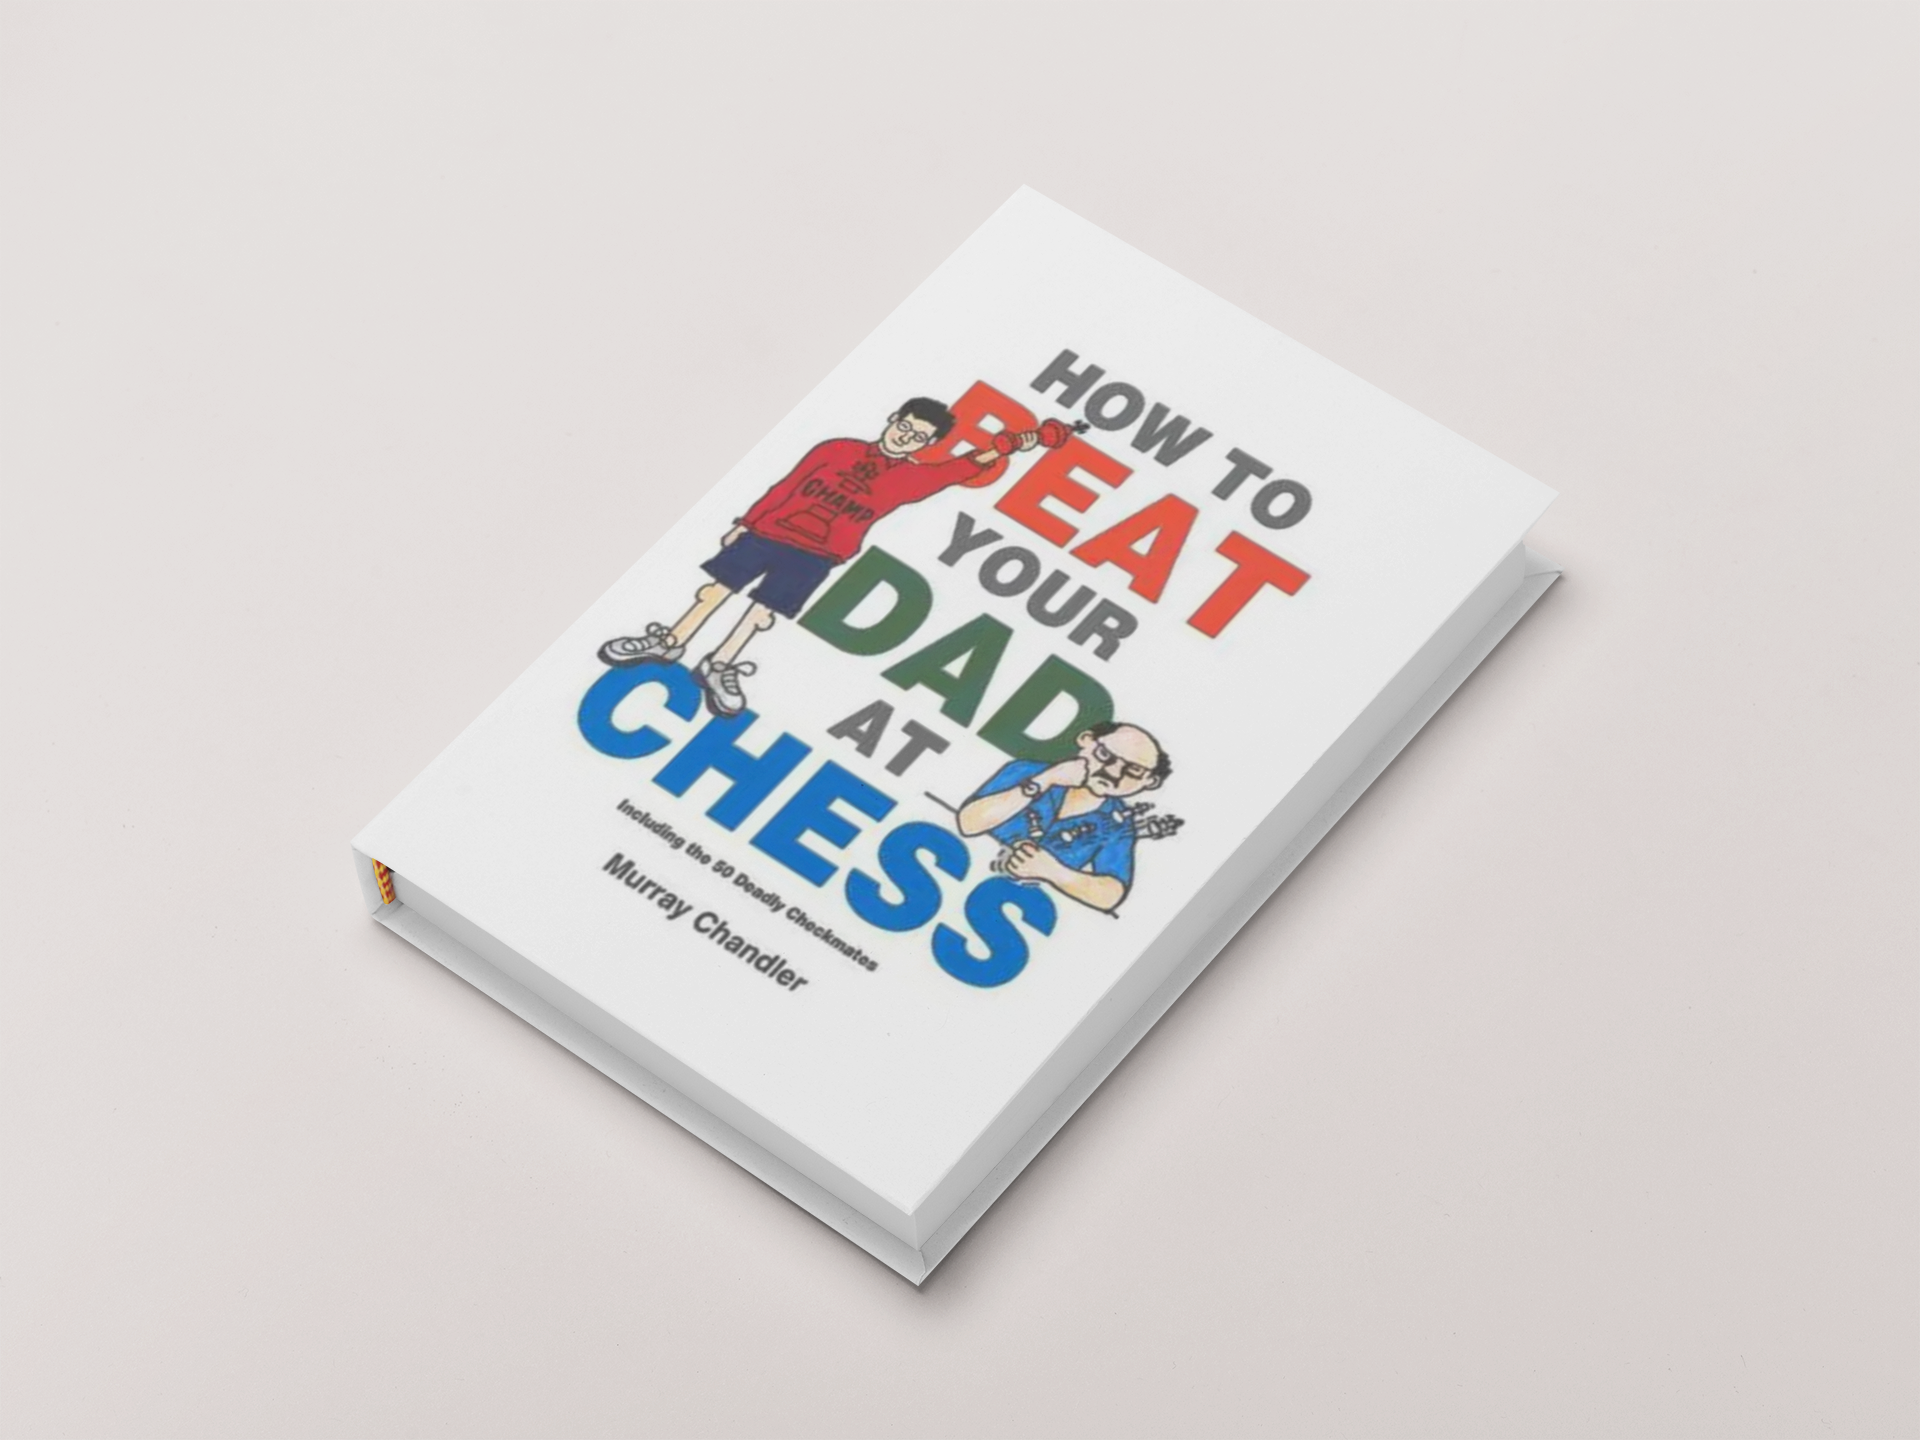 how to beat your dad at chess book by murray chandler